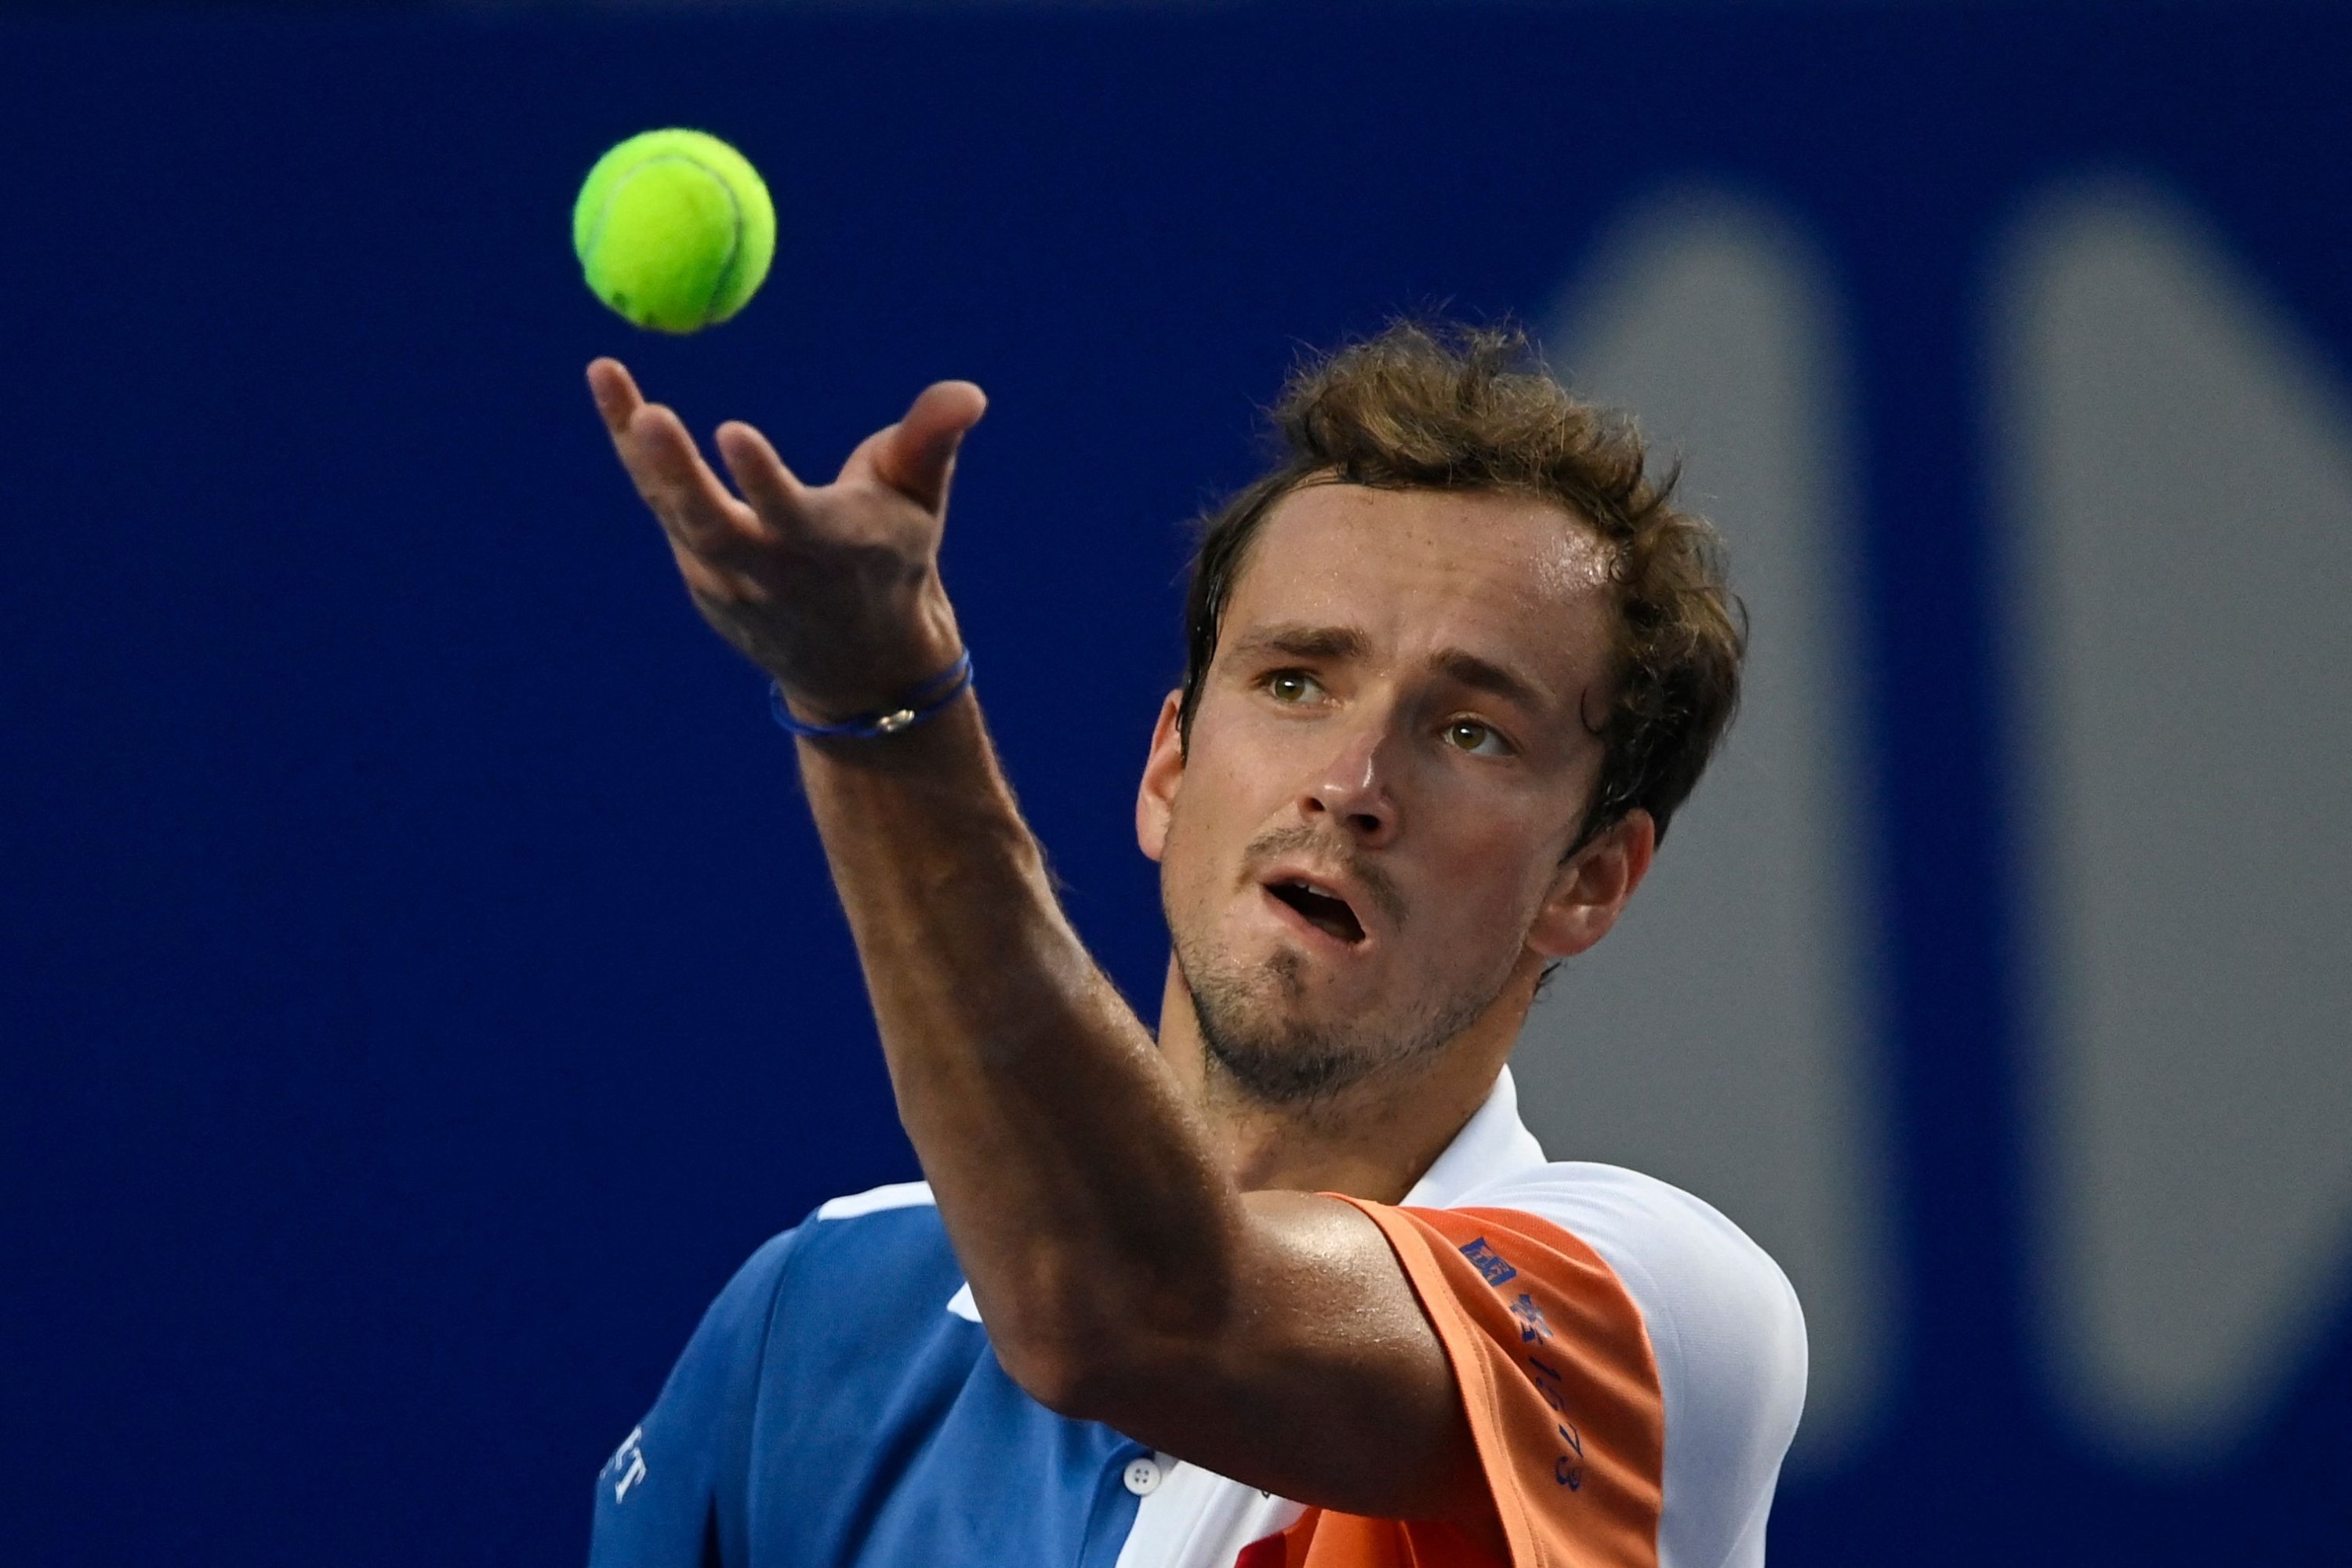 Daniil Medvedev serves against Pablo Andujar during their Mexican Open match, Acapulco, Mexico, Feb. 23, 2022. (AFP Photo)